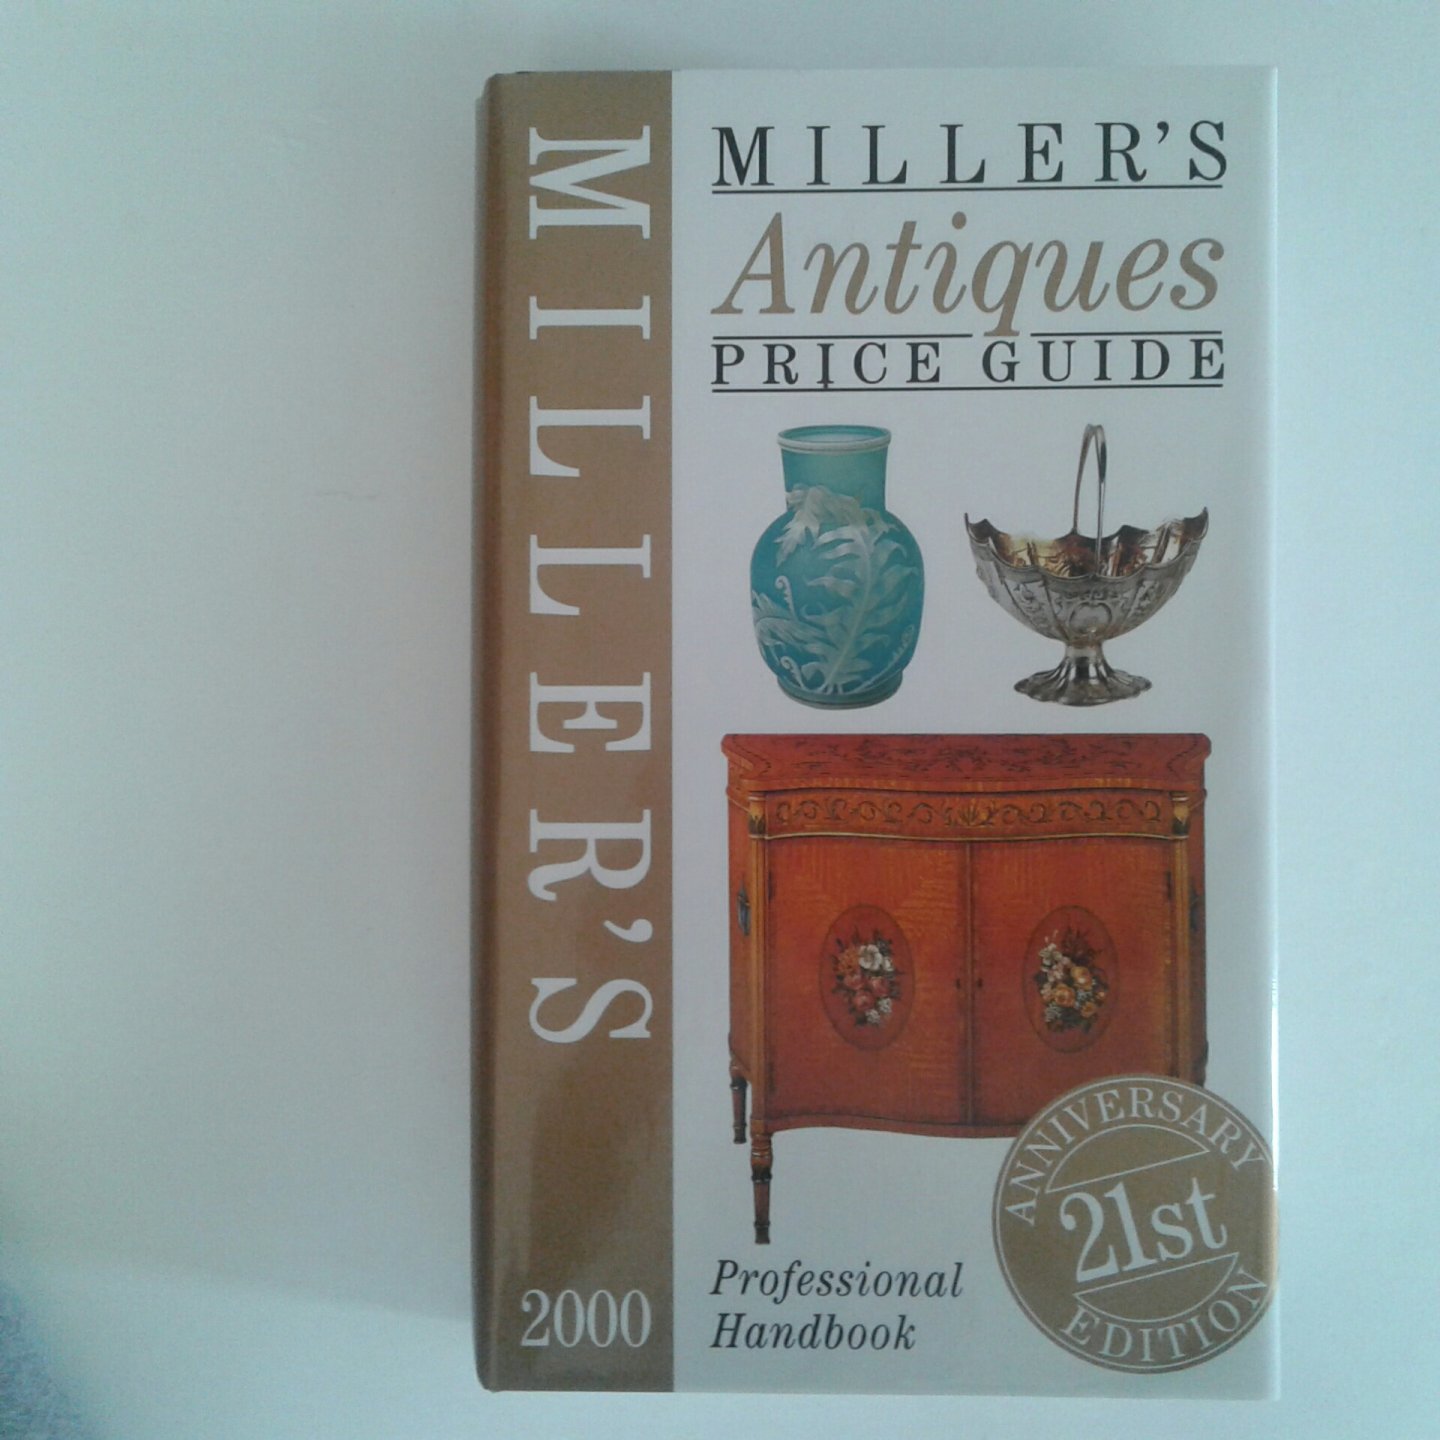  - Miller's Antiques Price Guide 2000 ; professional Handbook